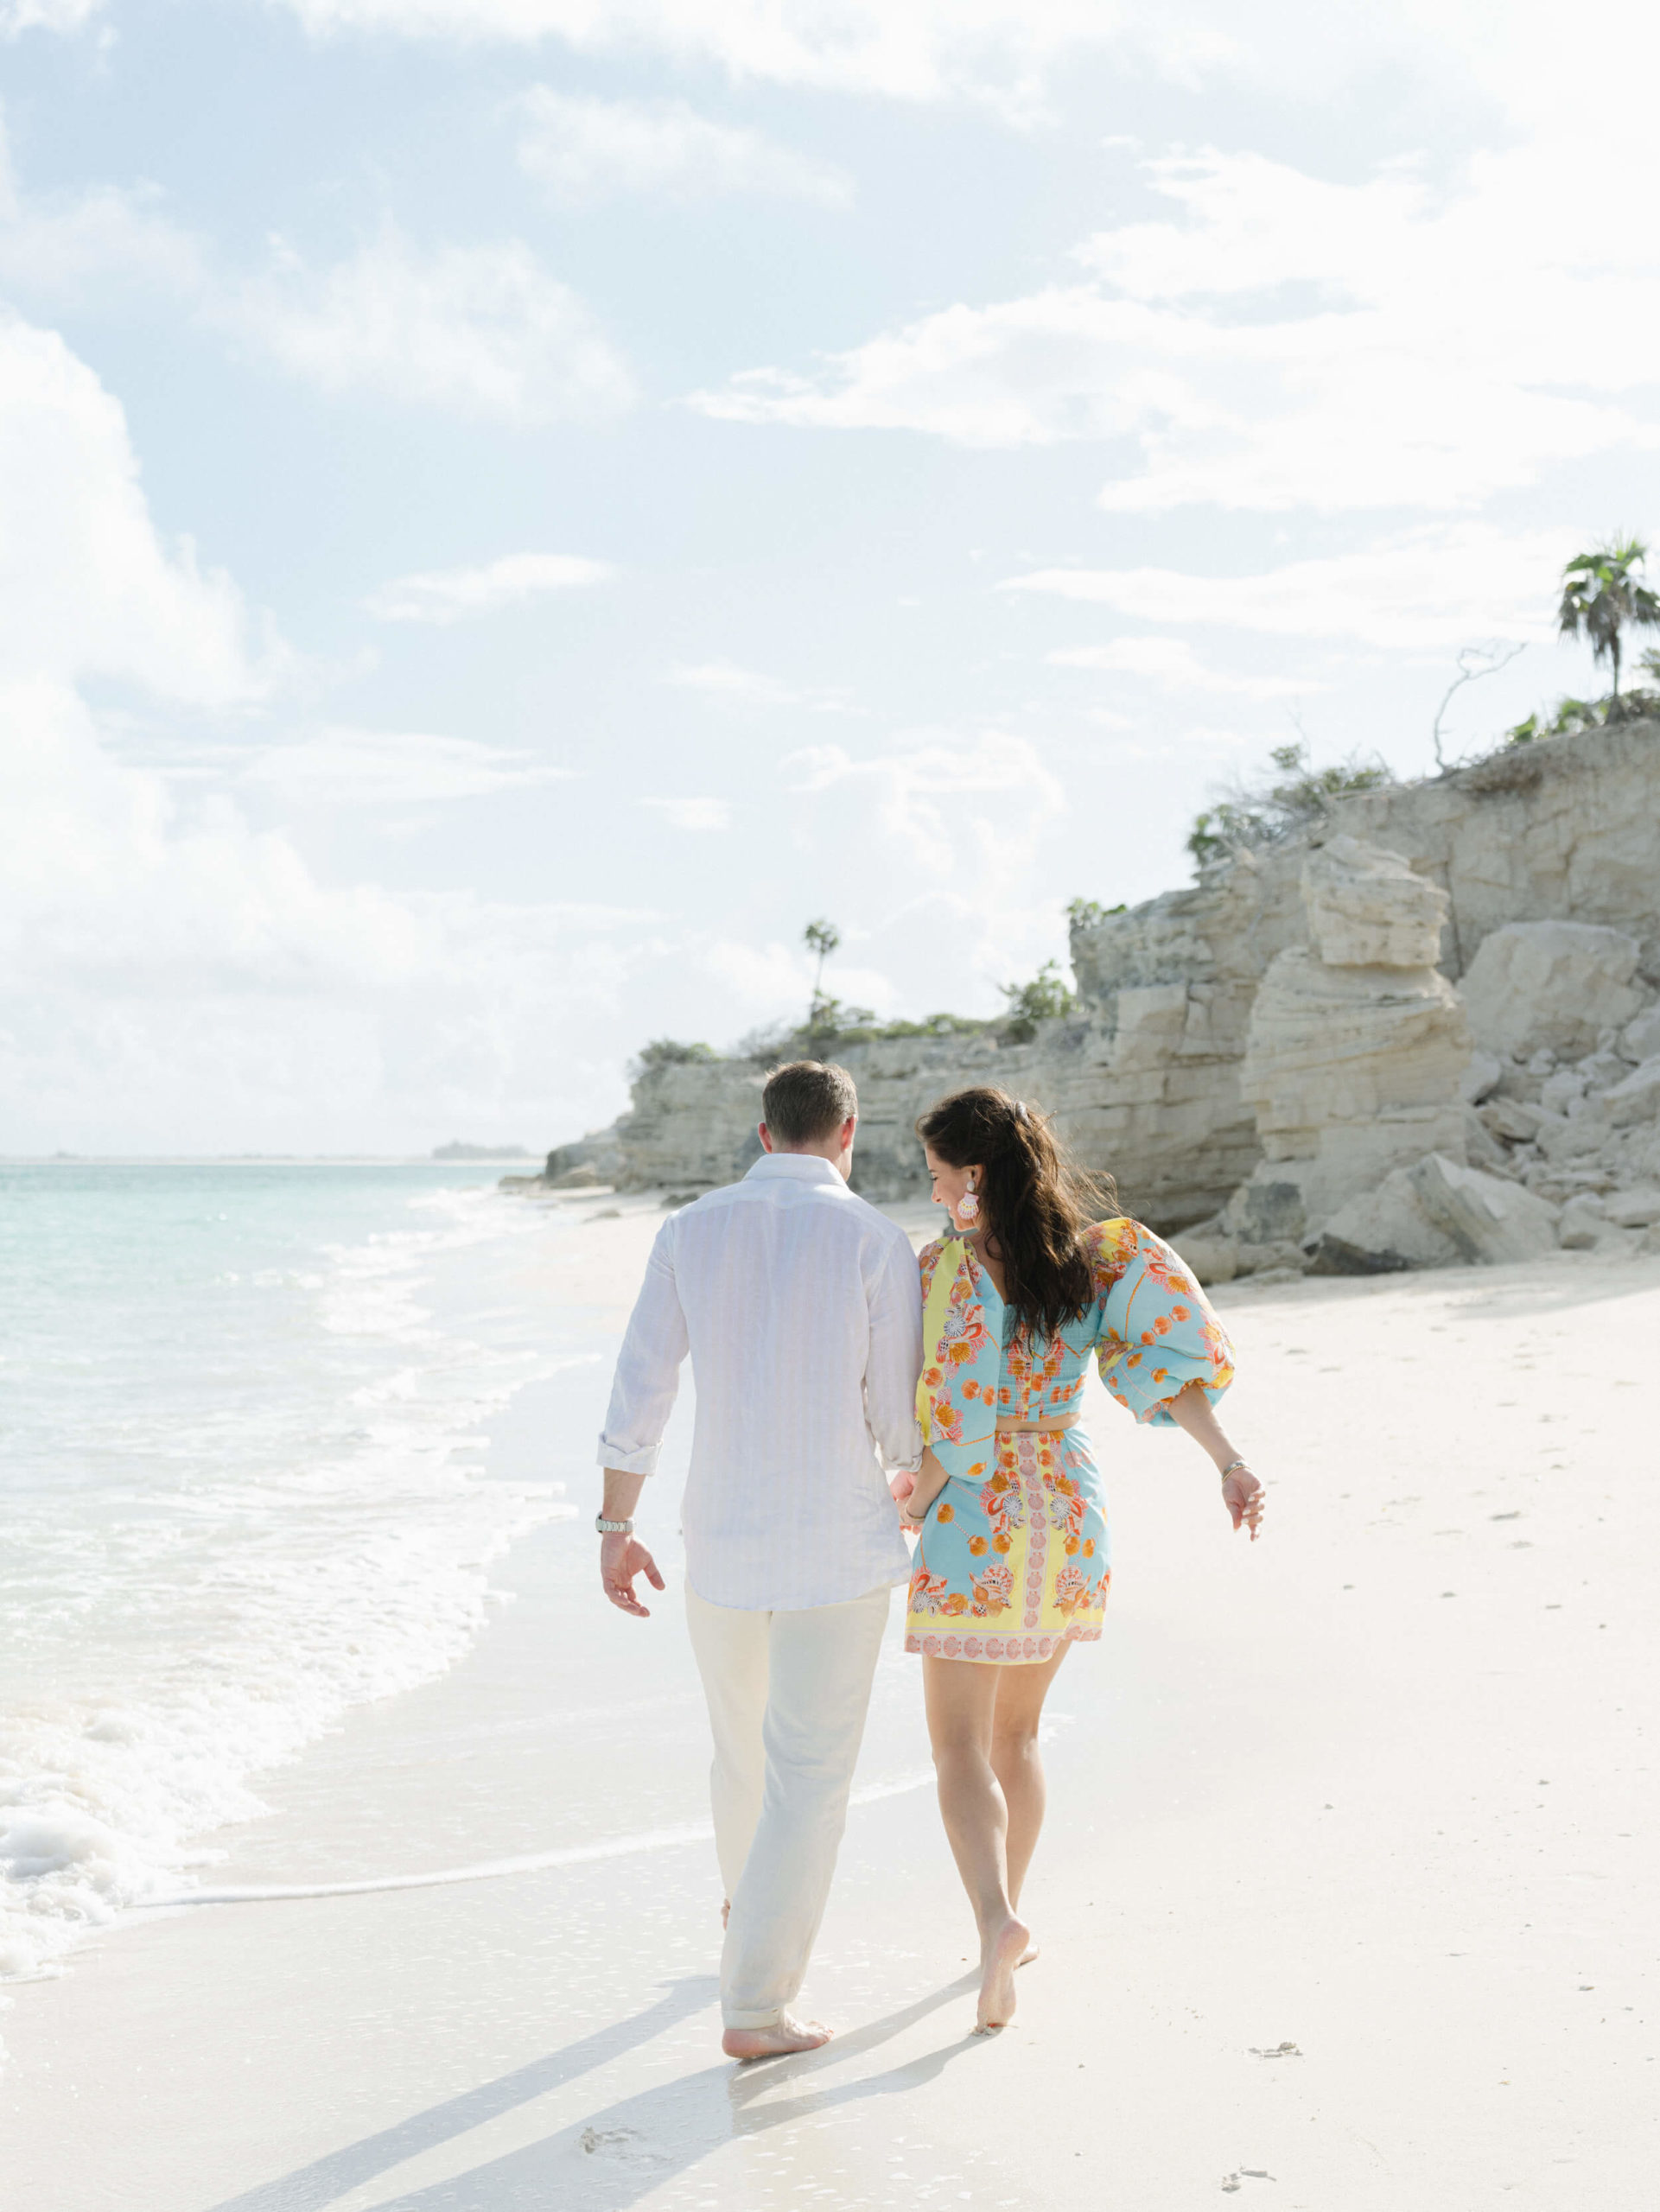 Liz and Dave walking along the rocky coast in Turks and Caicos